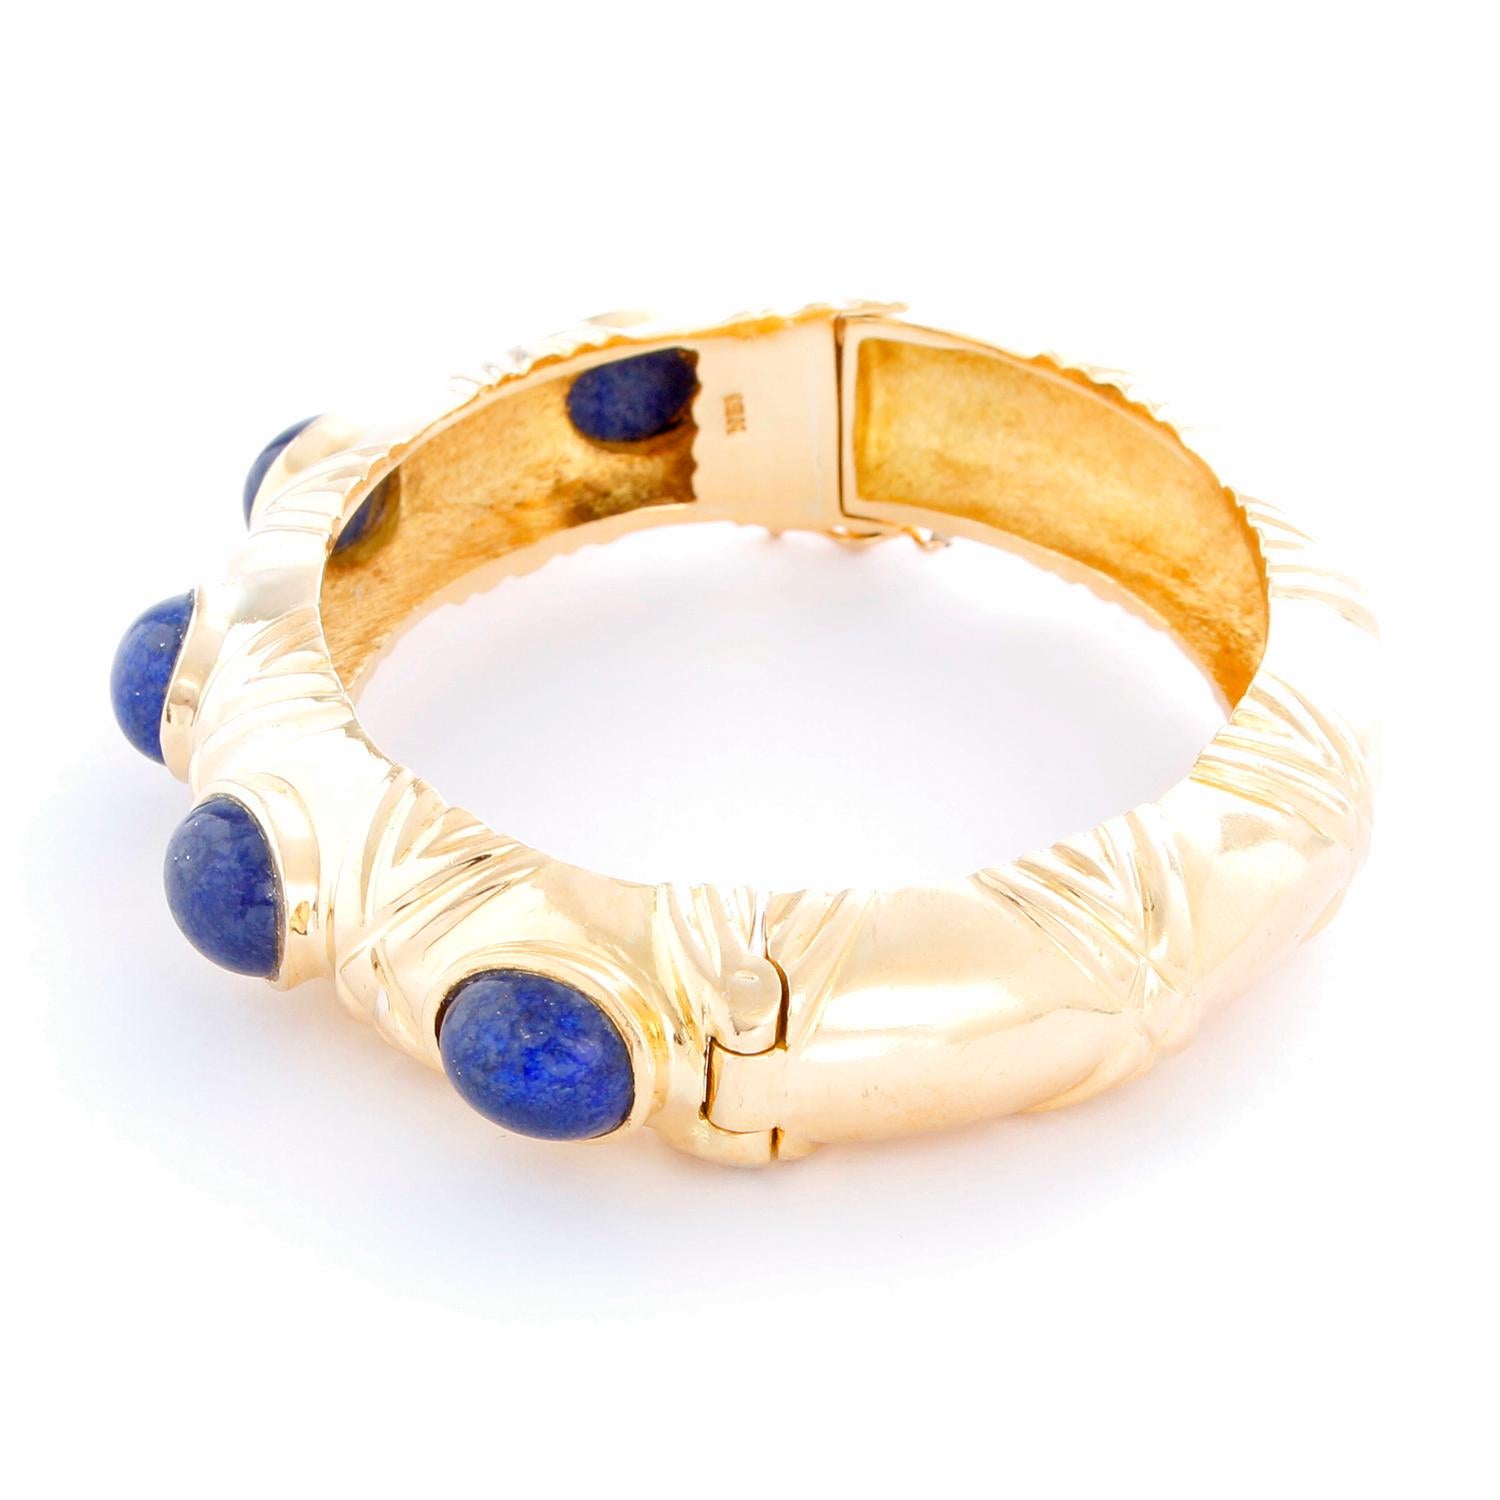 Classic 18K Yellow Gold Lapis Lazuli Bangle - 18K yellow gold with 5 Lapis Lazuli stones oval shaped bangle. Will fit up to a 6 1/4 inch wrist. Total weight 63.1 grams. Total width 13mm. Pre-owned with custom box.